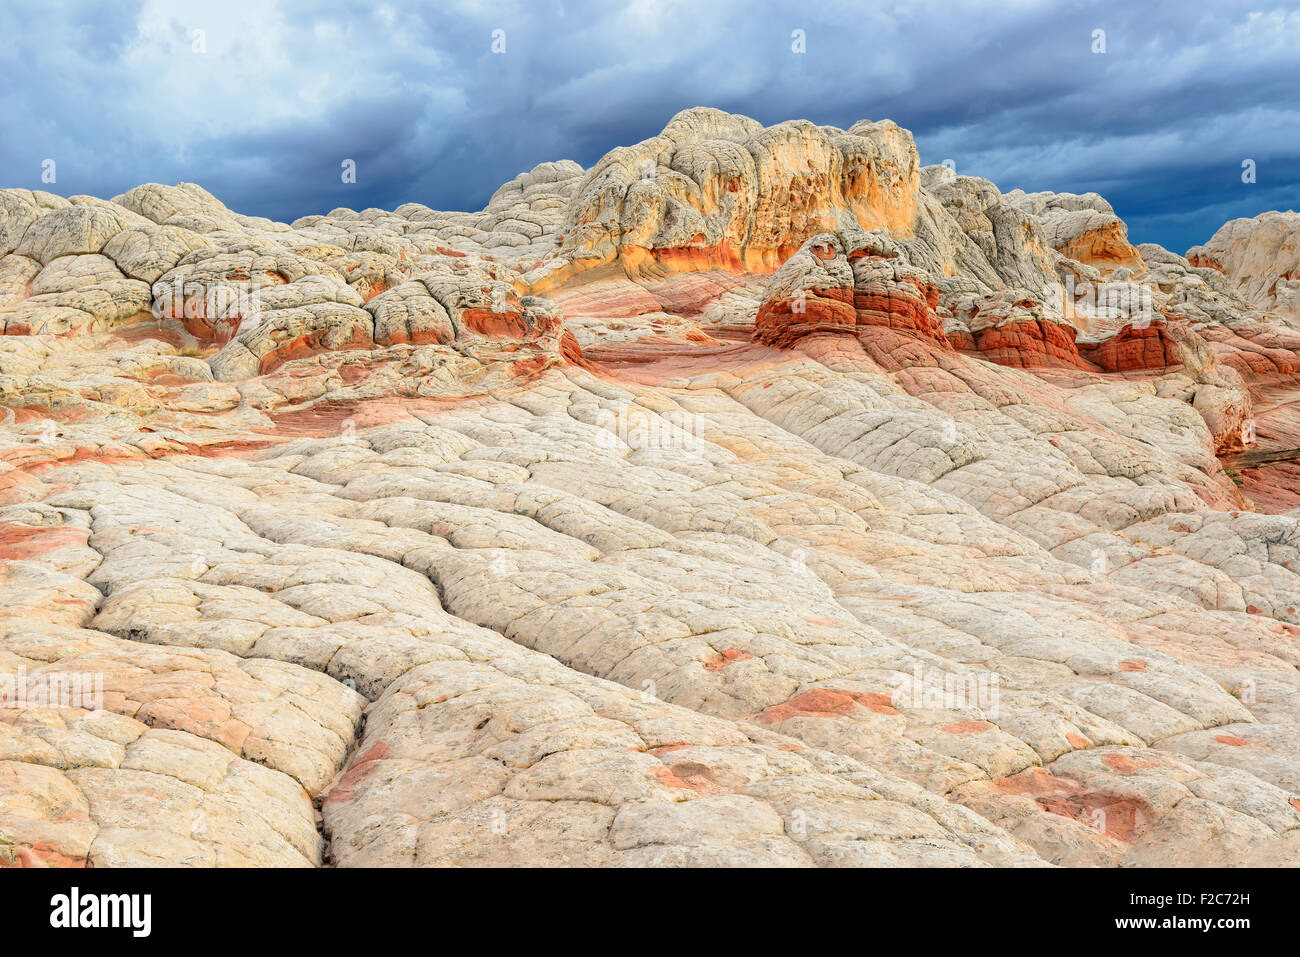 Sandstone rock formation at the White Pocket, area of Vermilion Cliffs National Monument Stock Photo